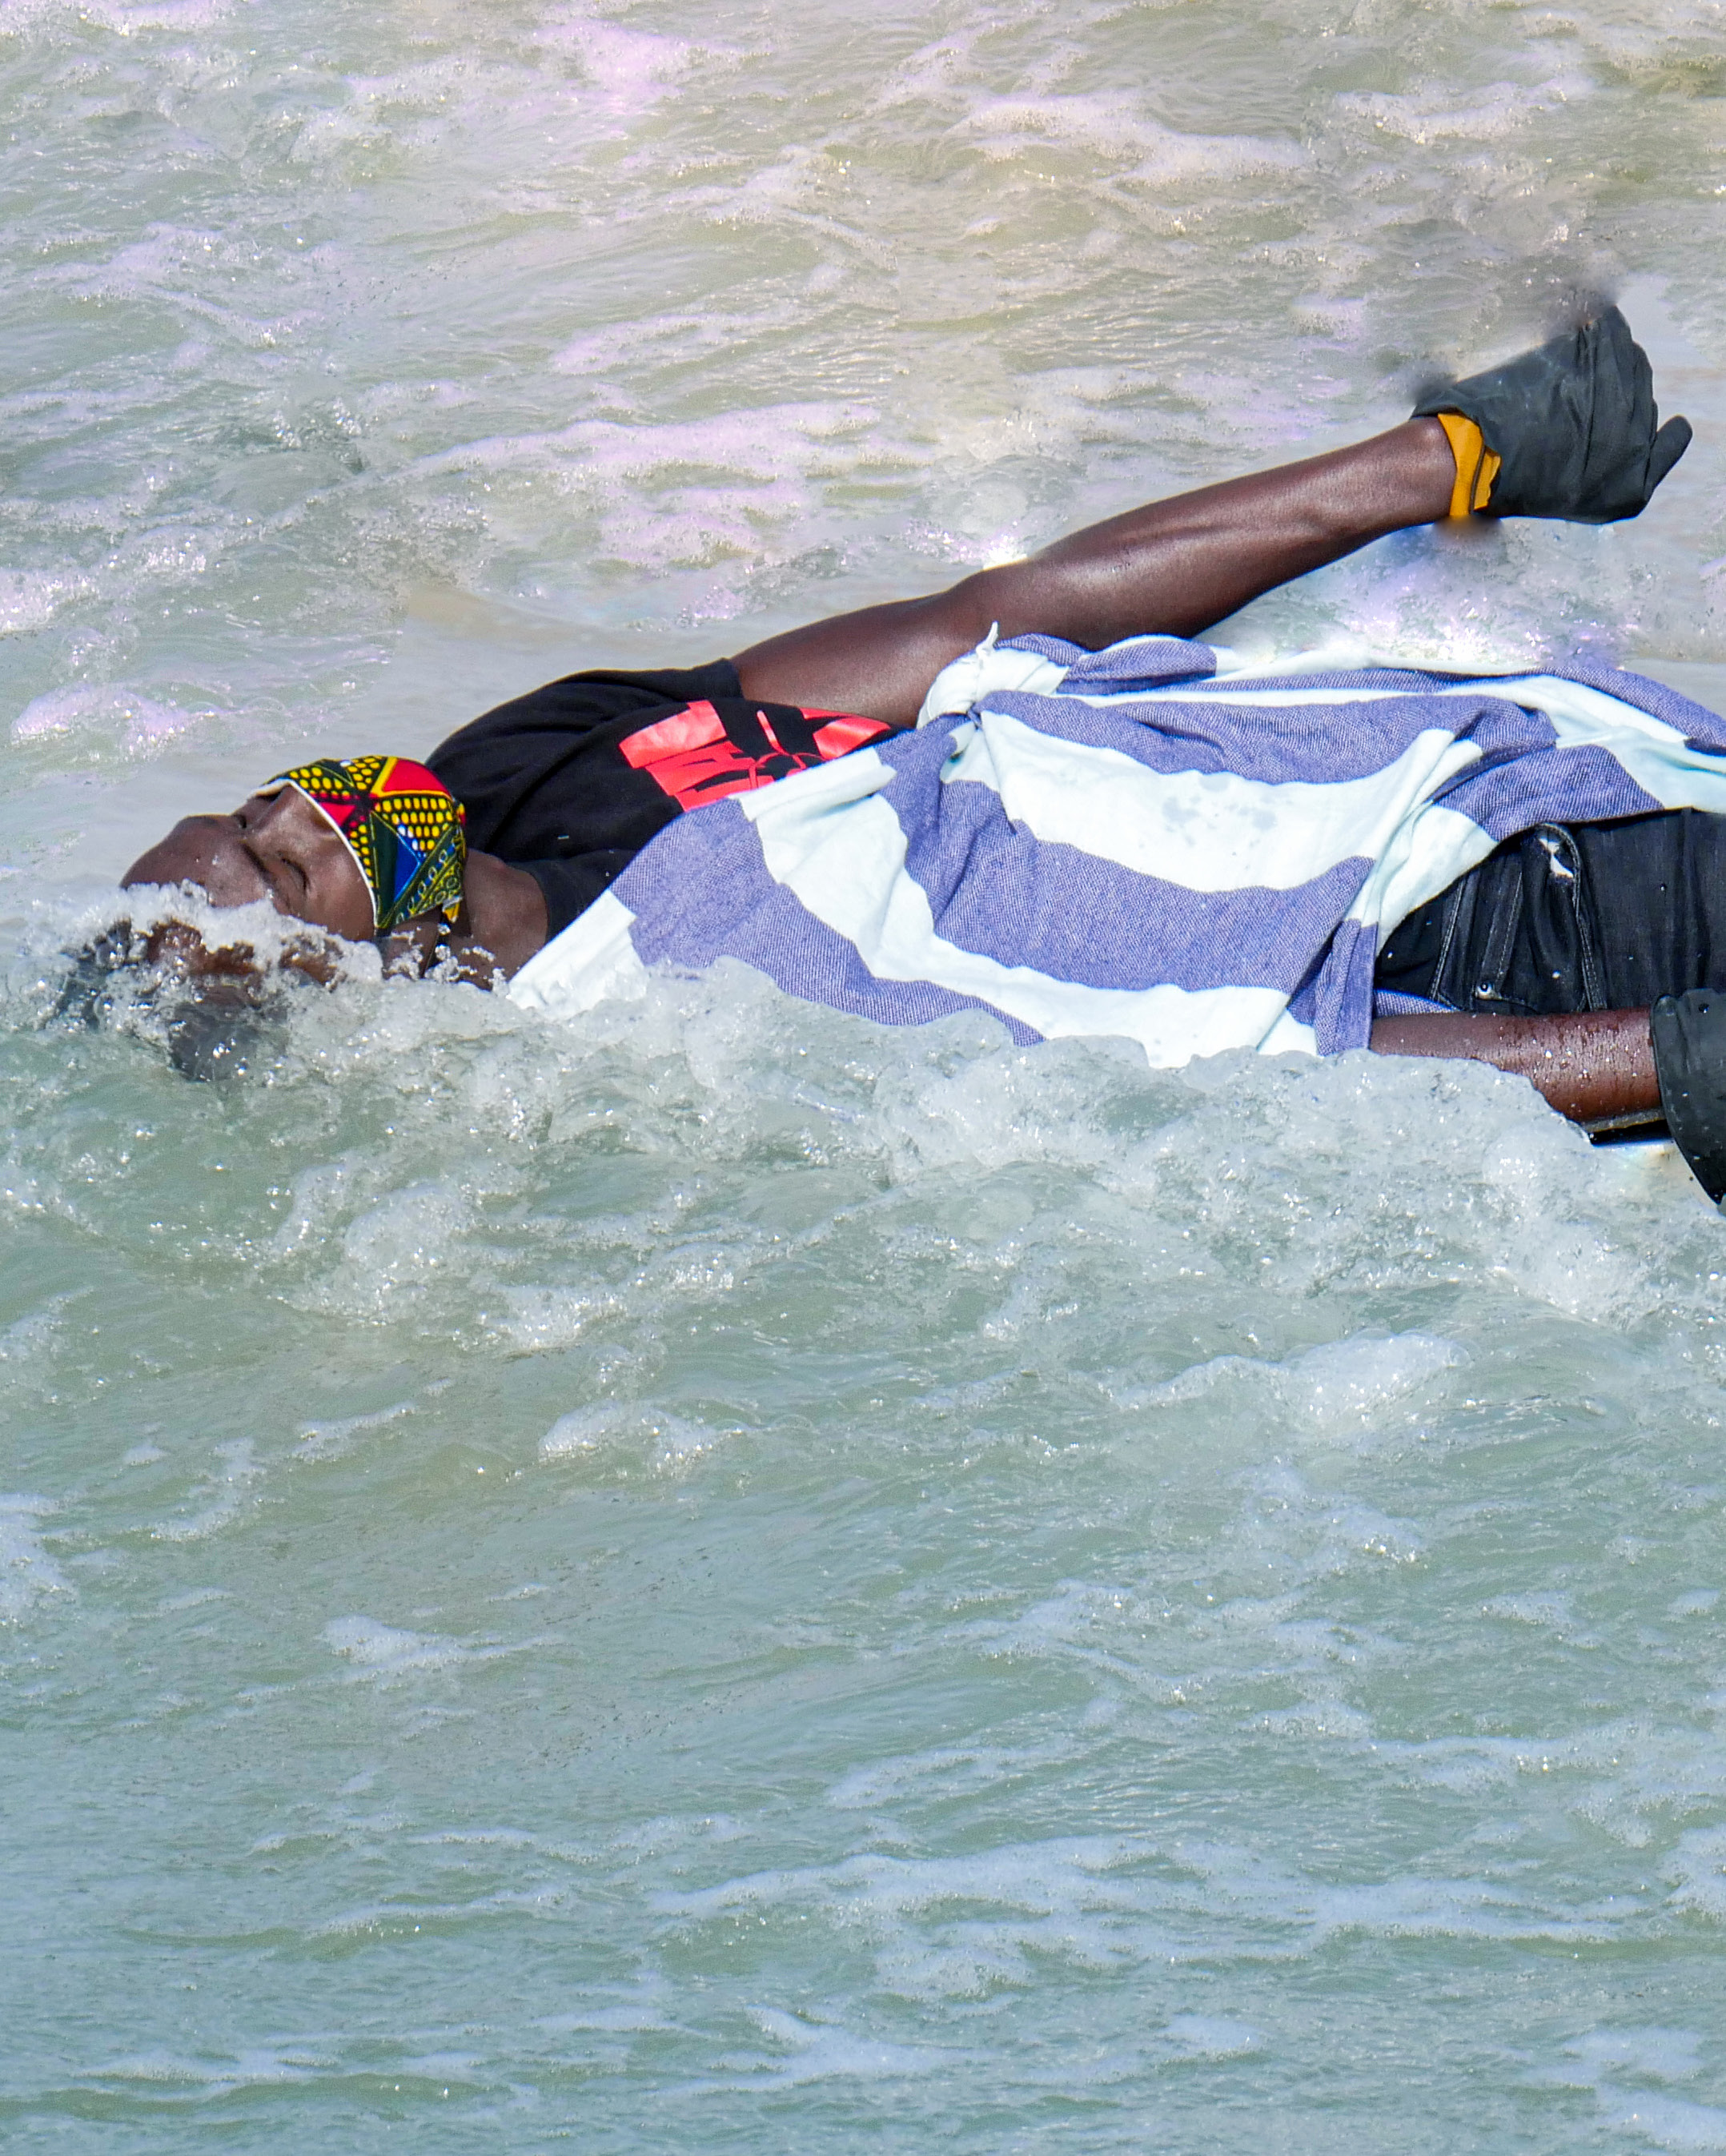 The person drowning in this Covid-19 exposition is metaphorical in depicting water as a source of death, conflict, war and tension (Source: Abdoulaye Touré, 2021, CC BY-NC-ND 4.0).